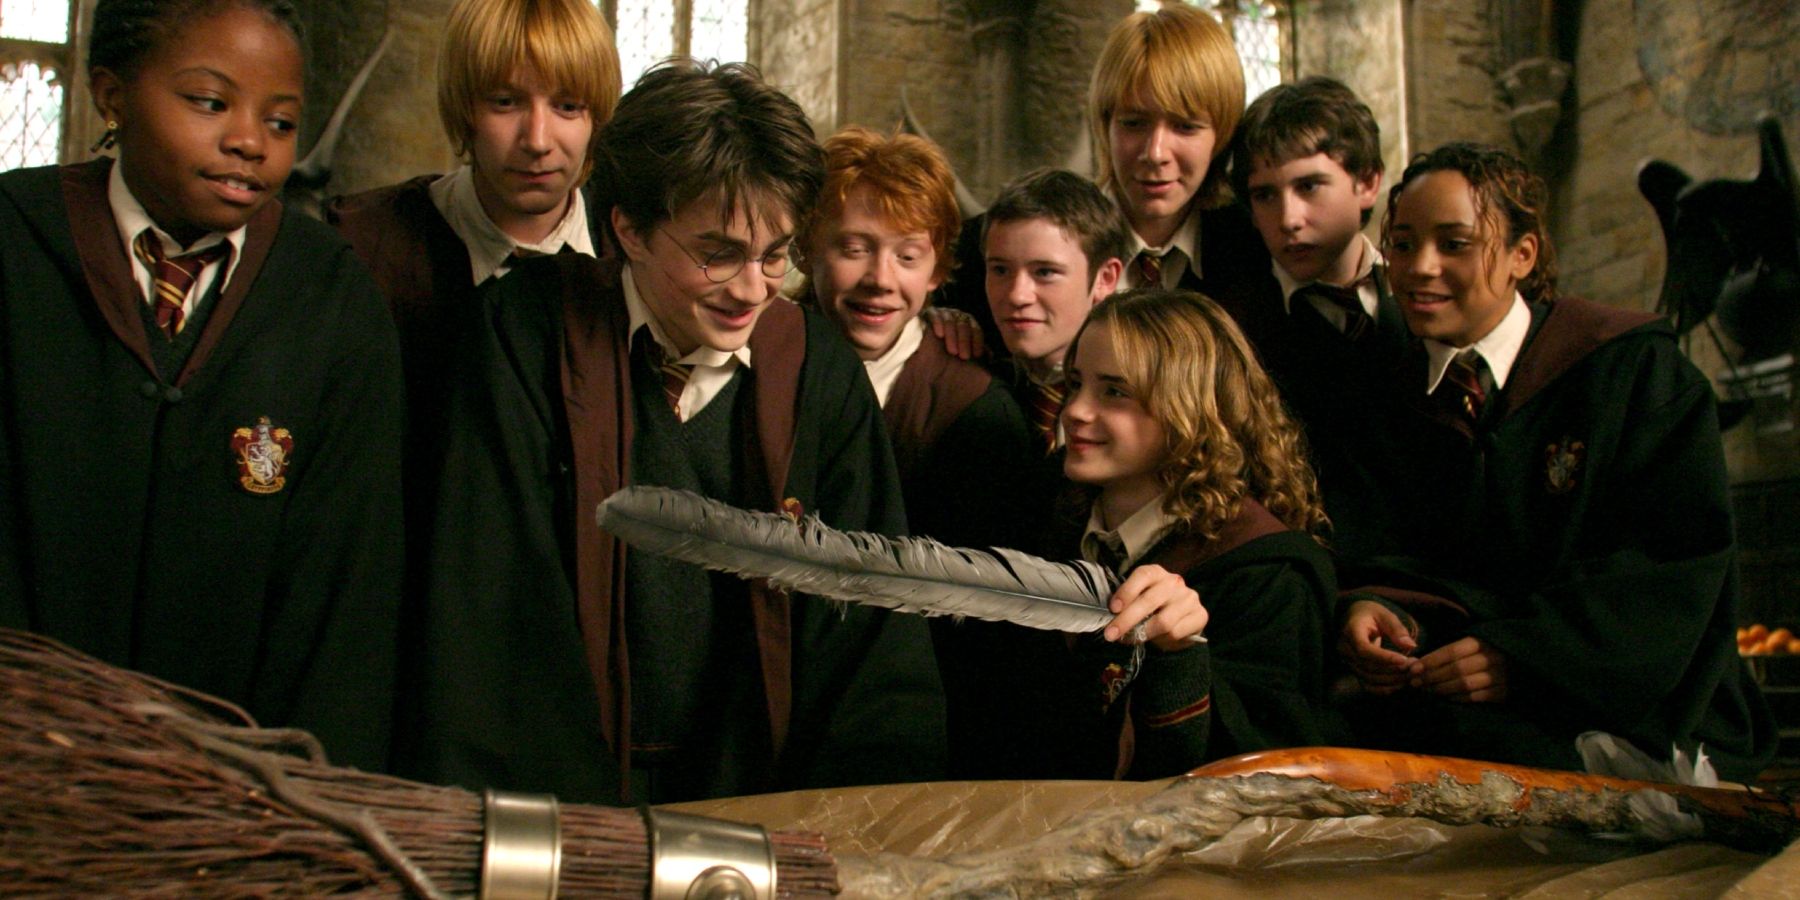 Harry, Ron, Hermione and classmates looking at the Firebolt broomstick in Harry Potter